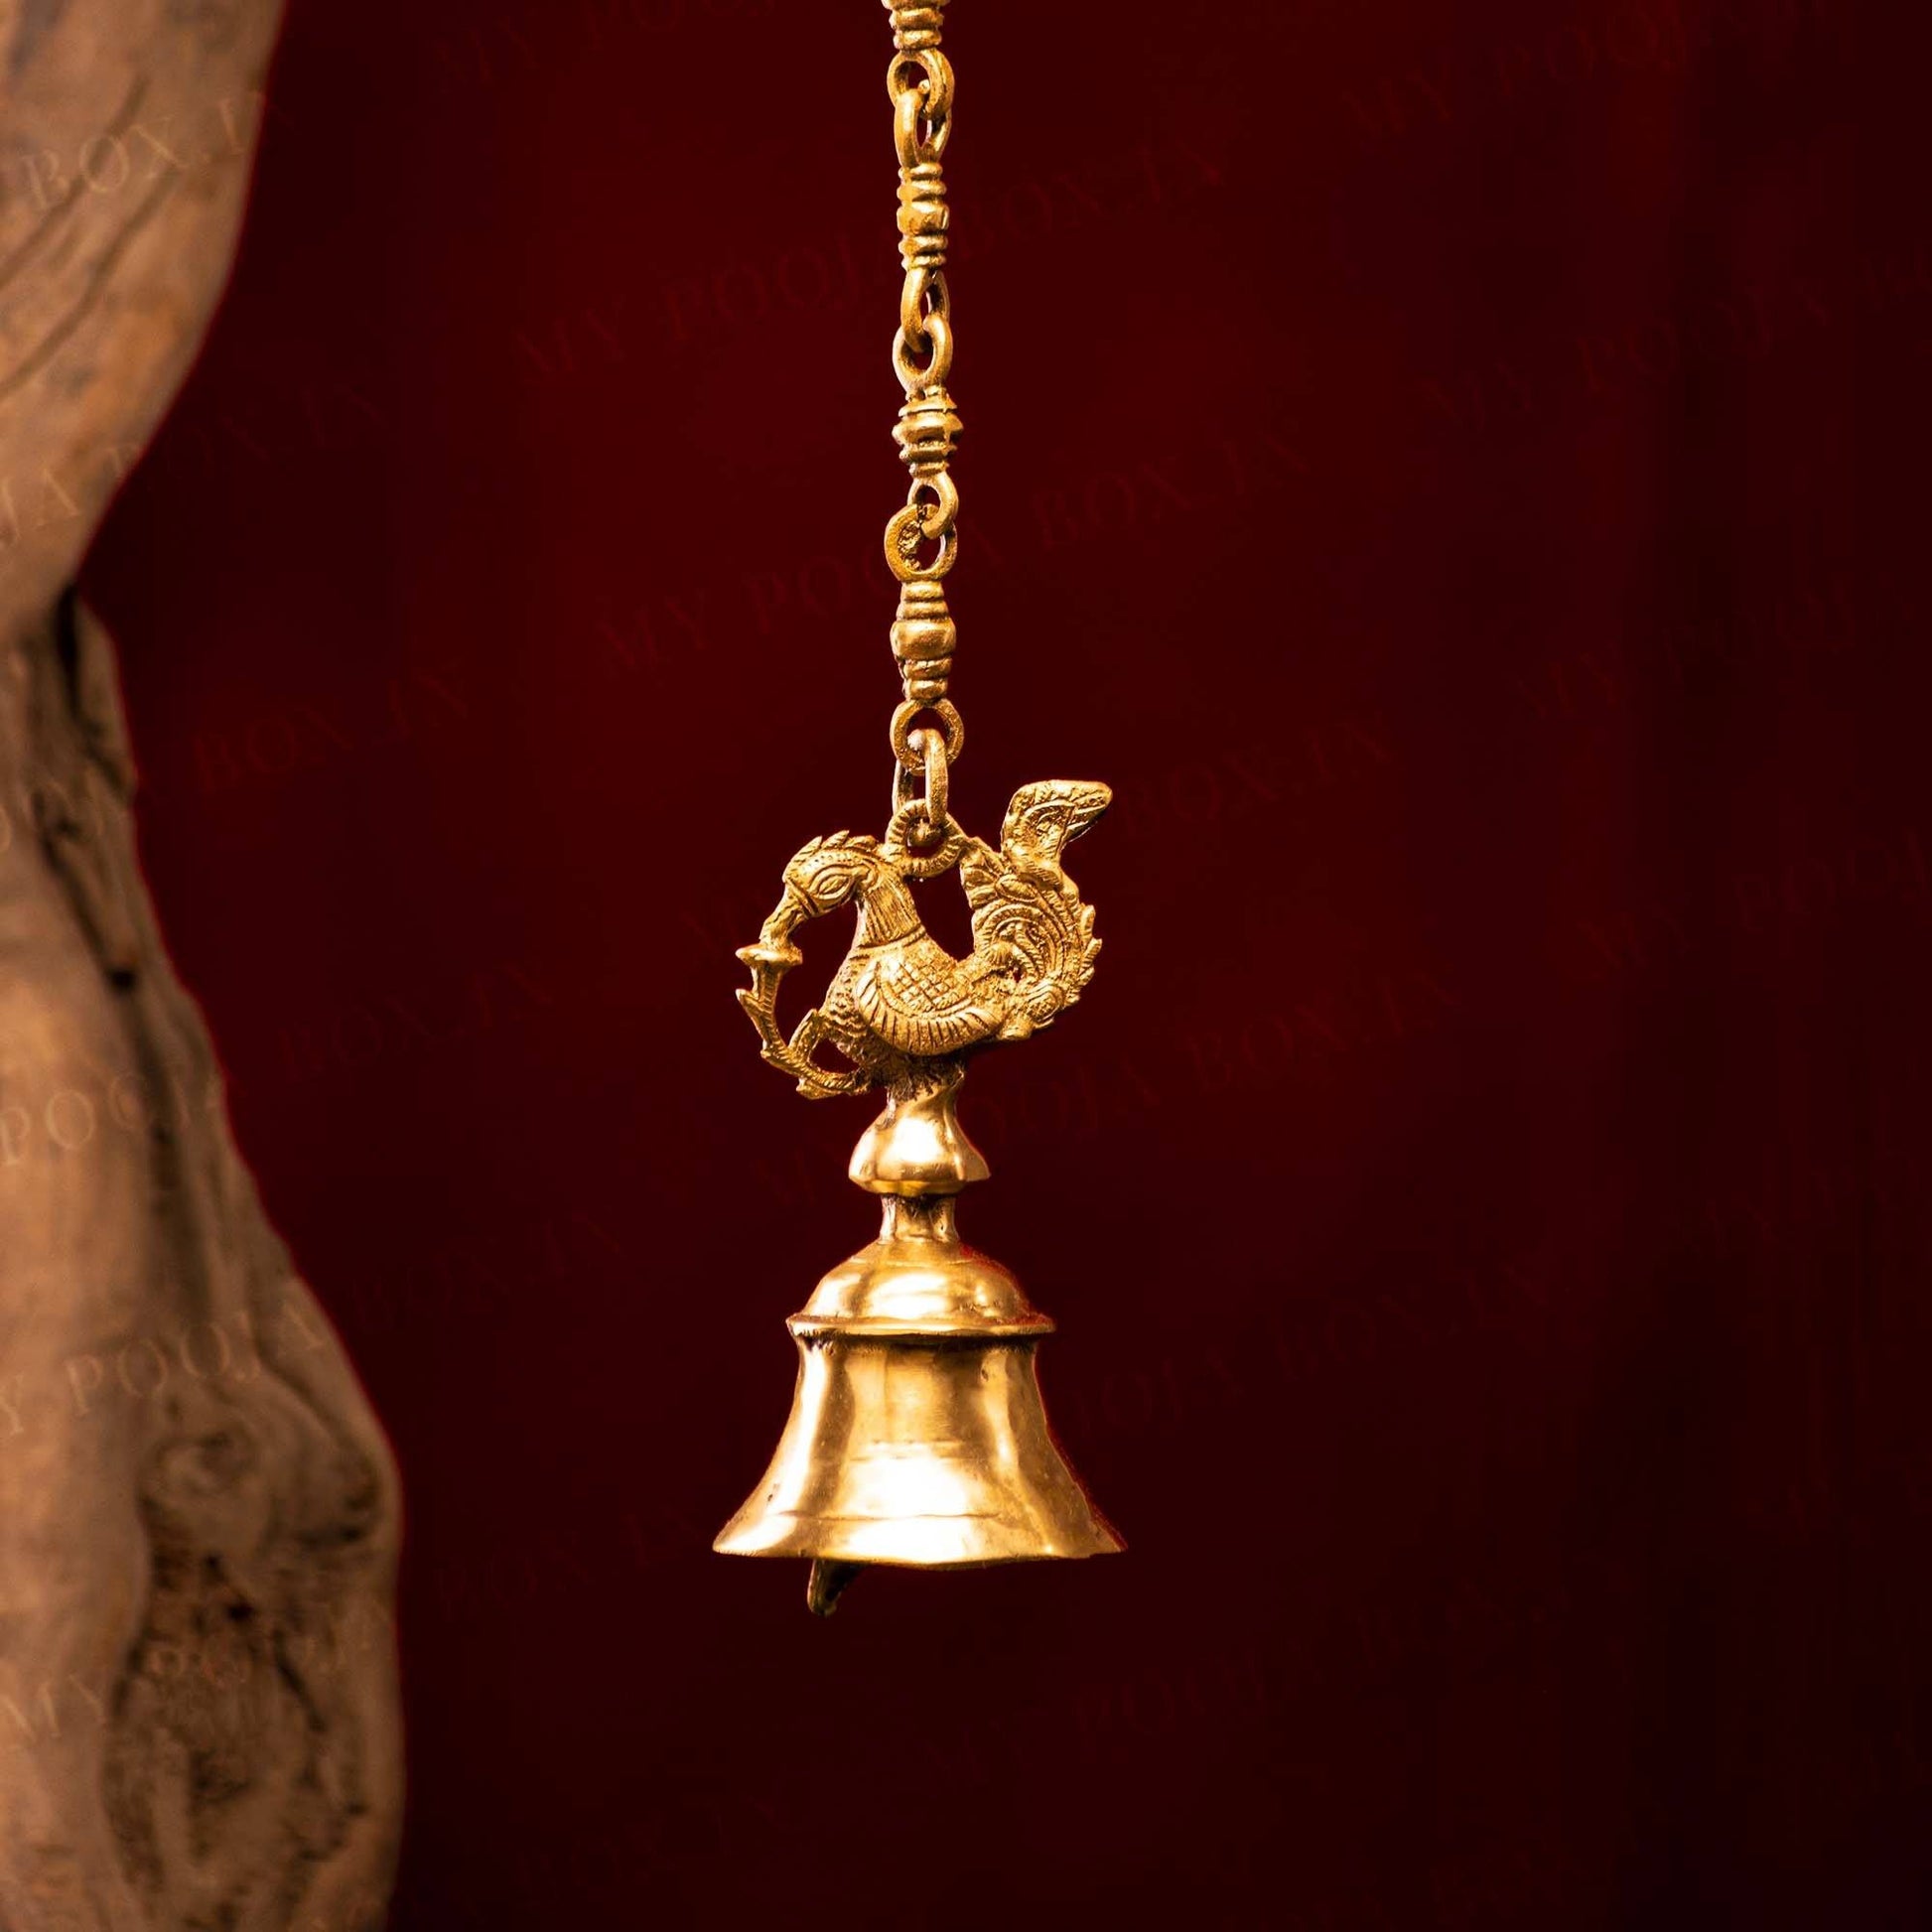 Buy Antique Brass Hanging Peacock Bell Online in India 